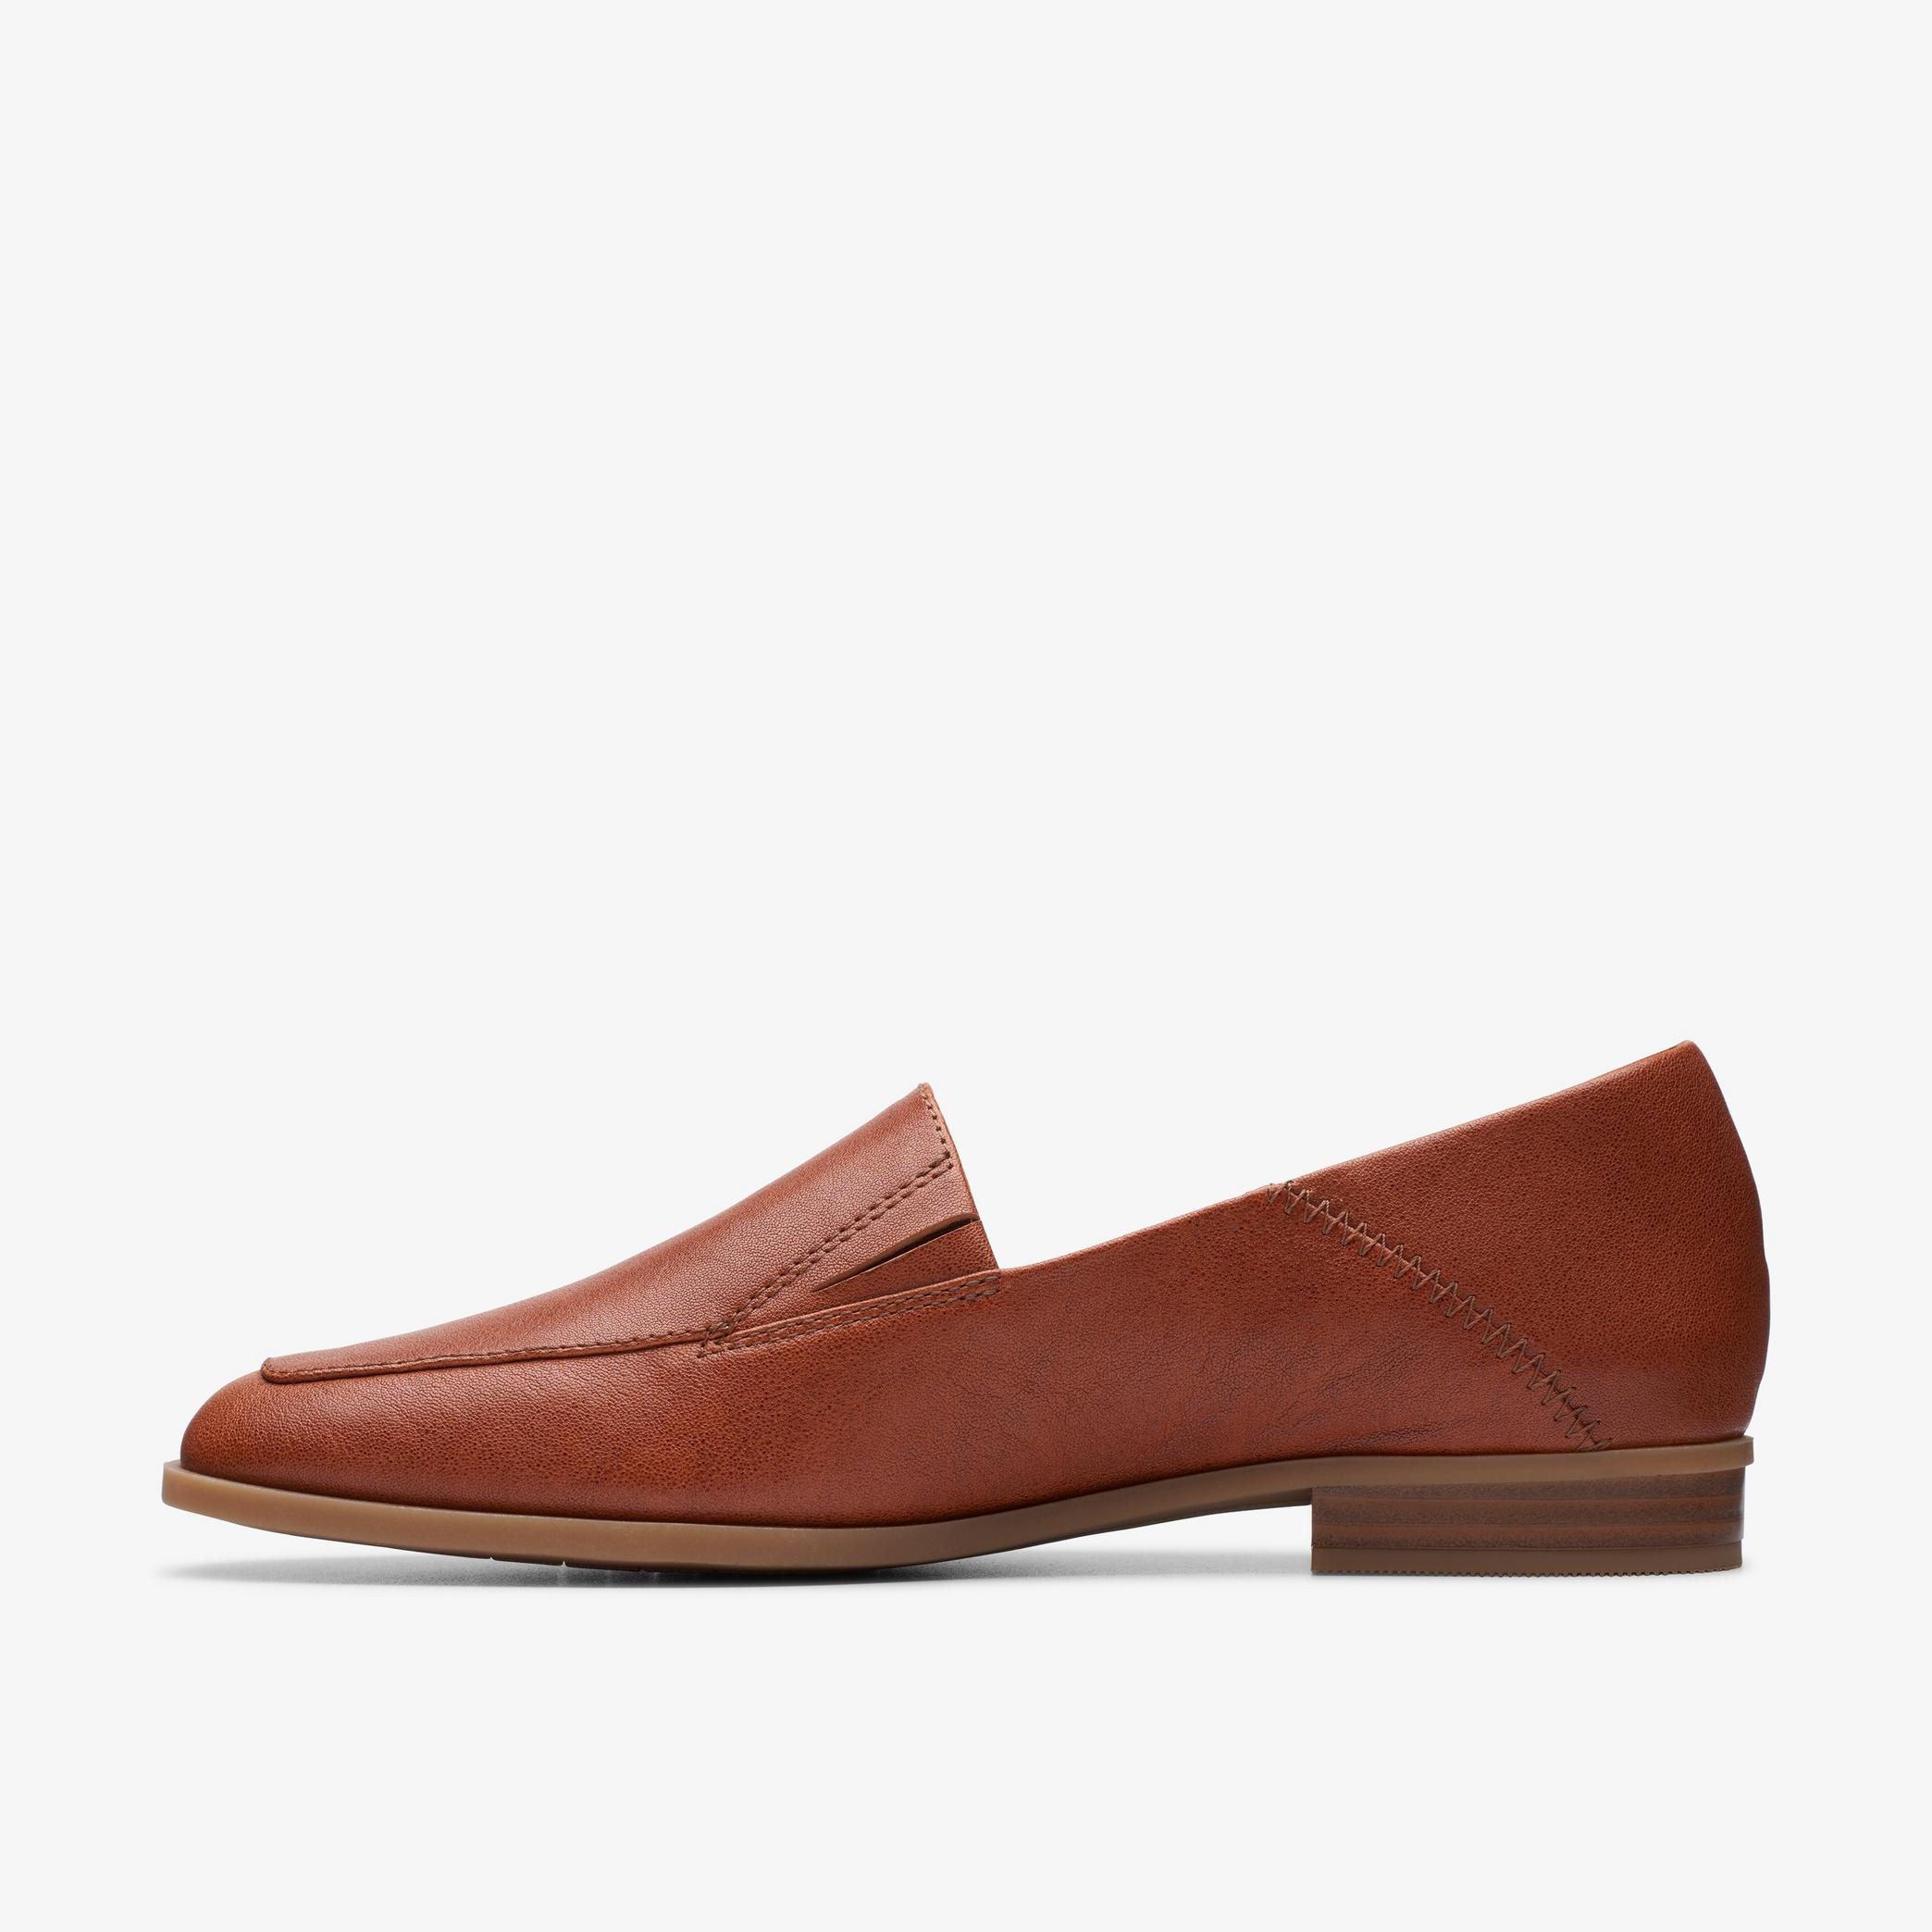 Sarafyna Freva Dark Tan Leather Loafers, view 2 of 6